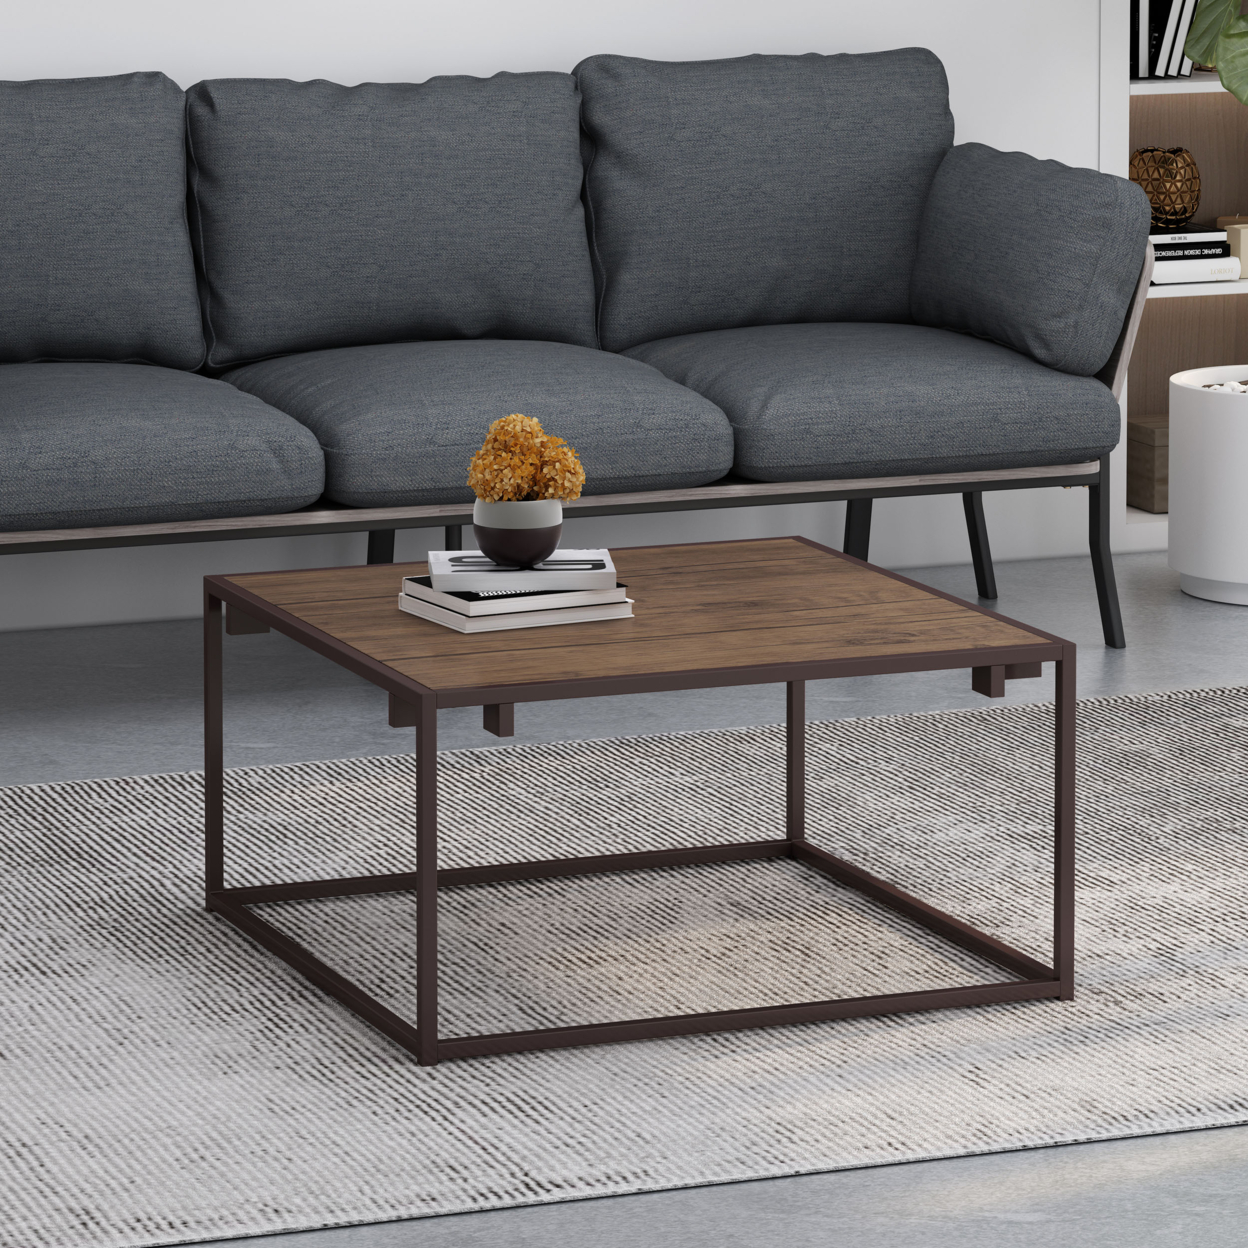 Fortson Modern Industrial Coffee Table - Brown/brozen Gold